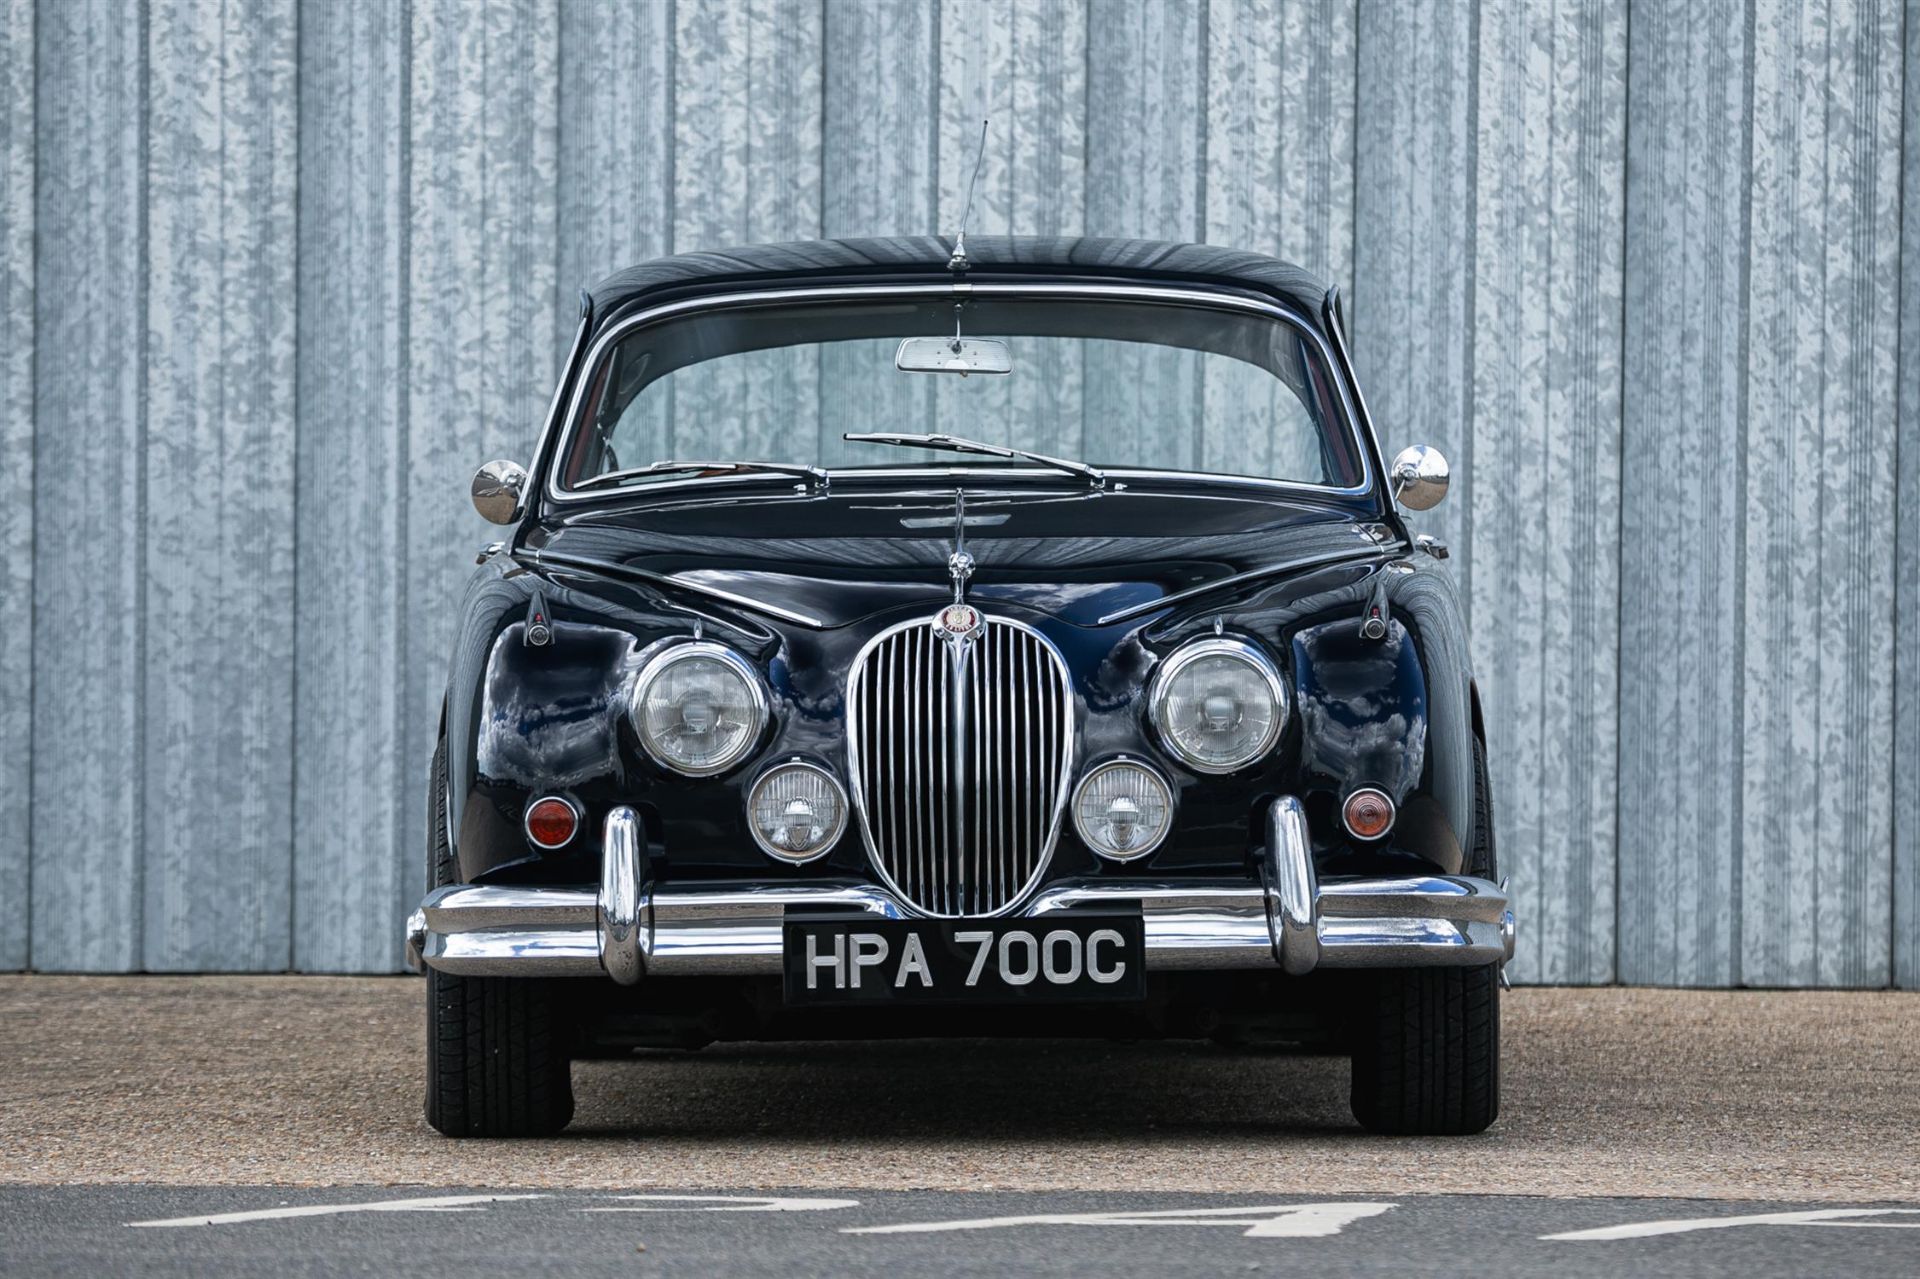 1964 Jaguar Mk2 3.8-Litre 'Coombs'-Style Sports Saloon - Image 6 of 10